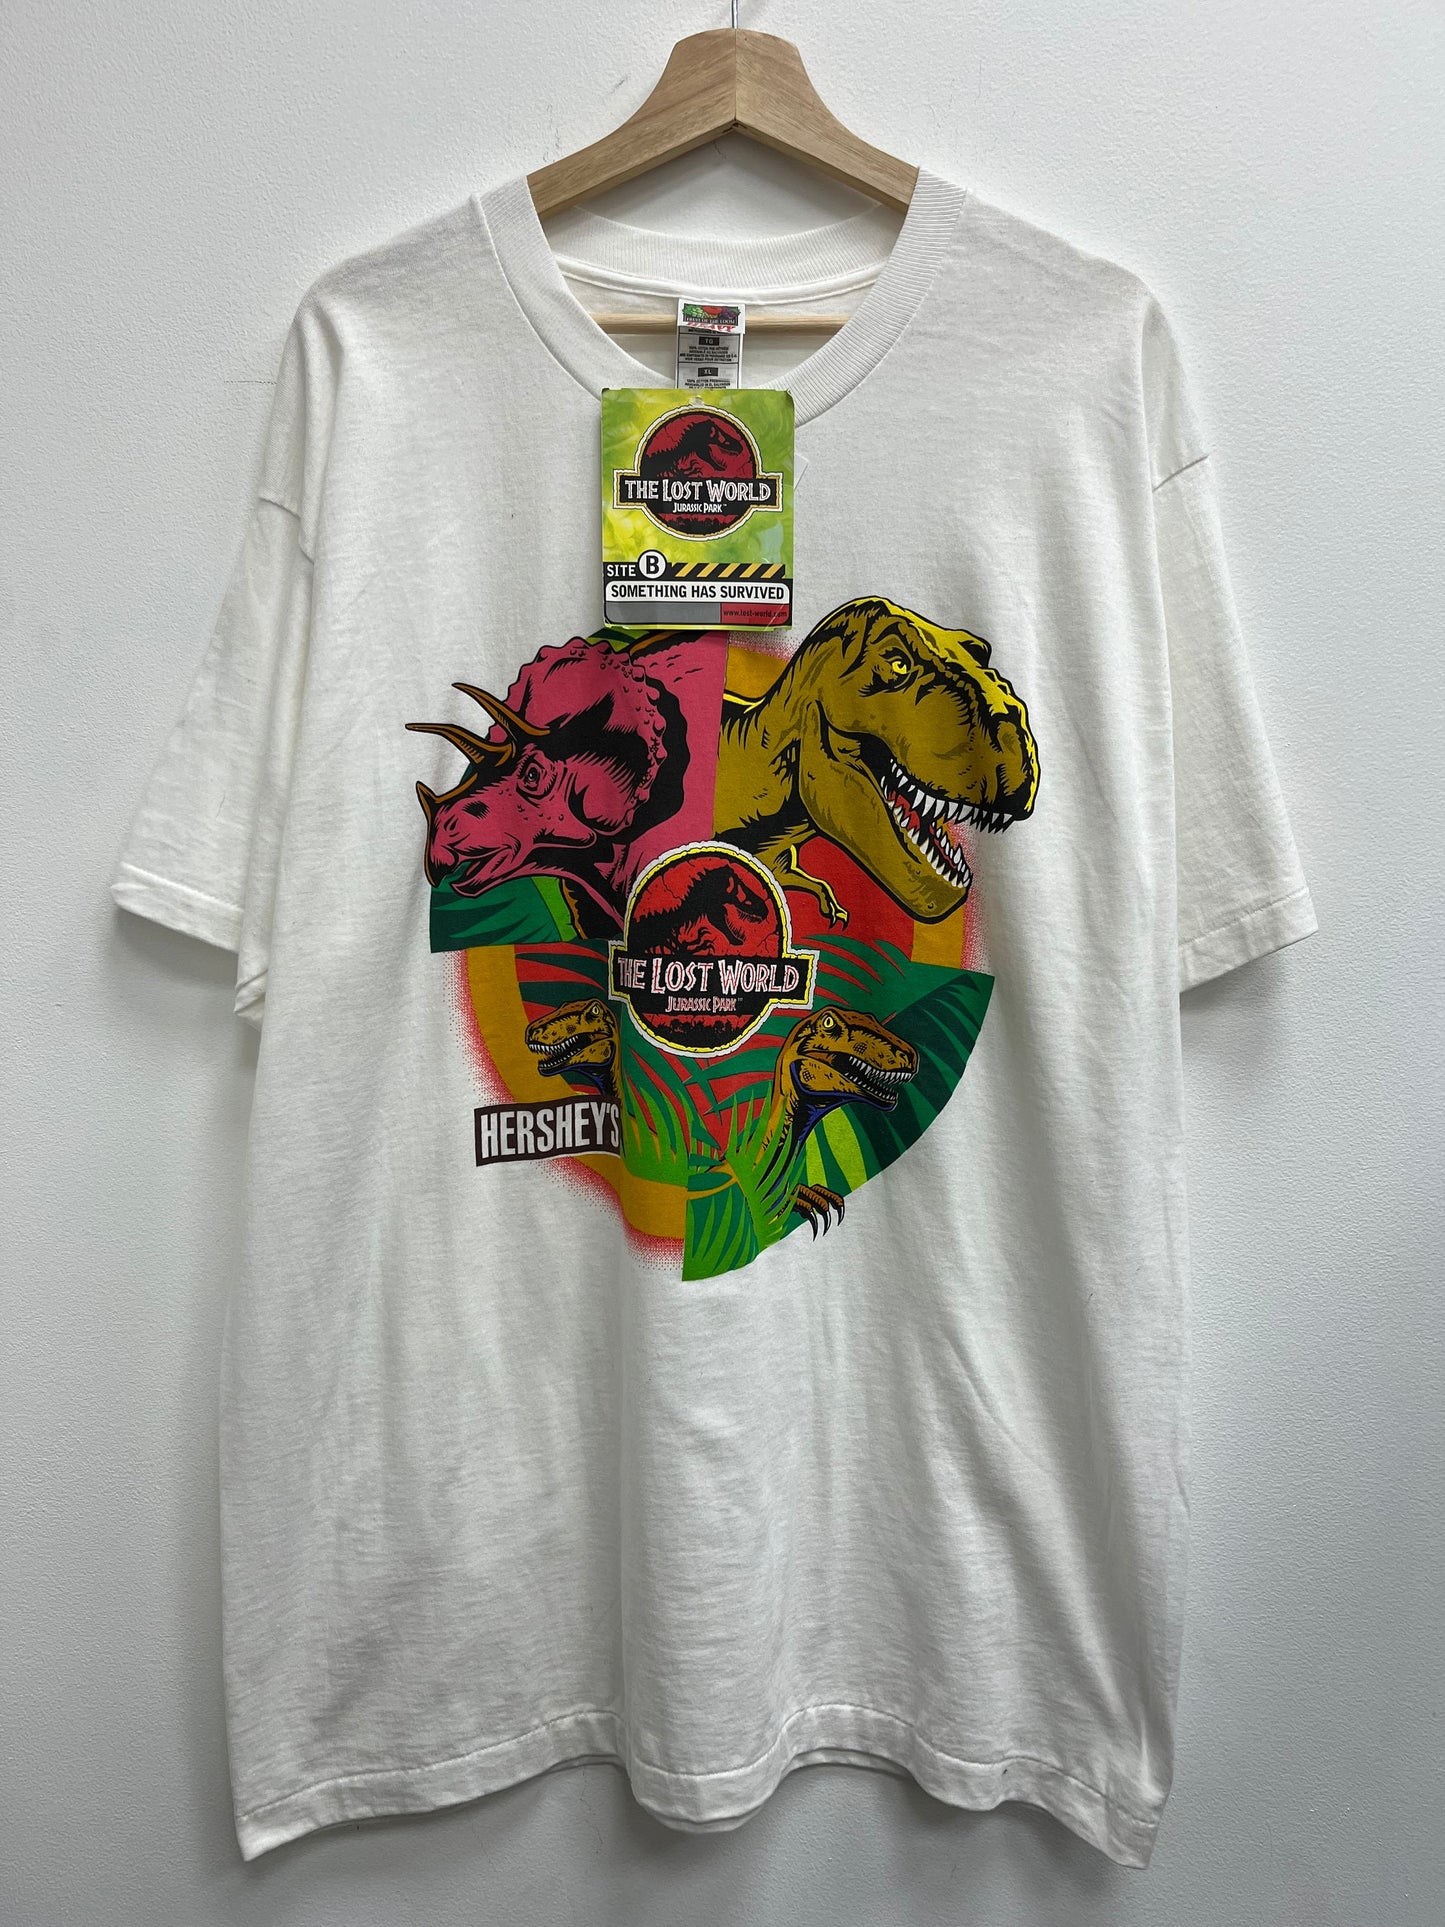 NWT Vintage 1990’s Jurassic Park The Lost World Tee